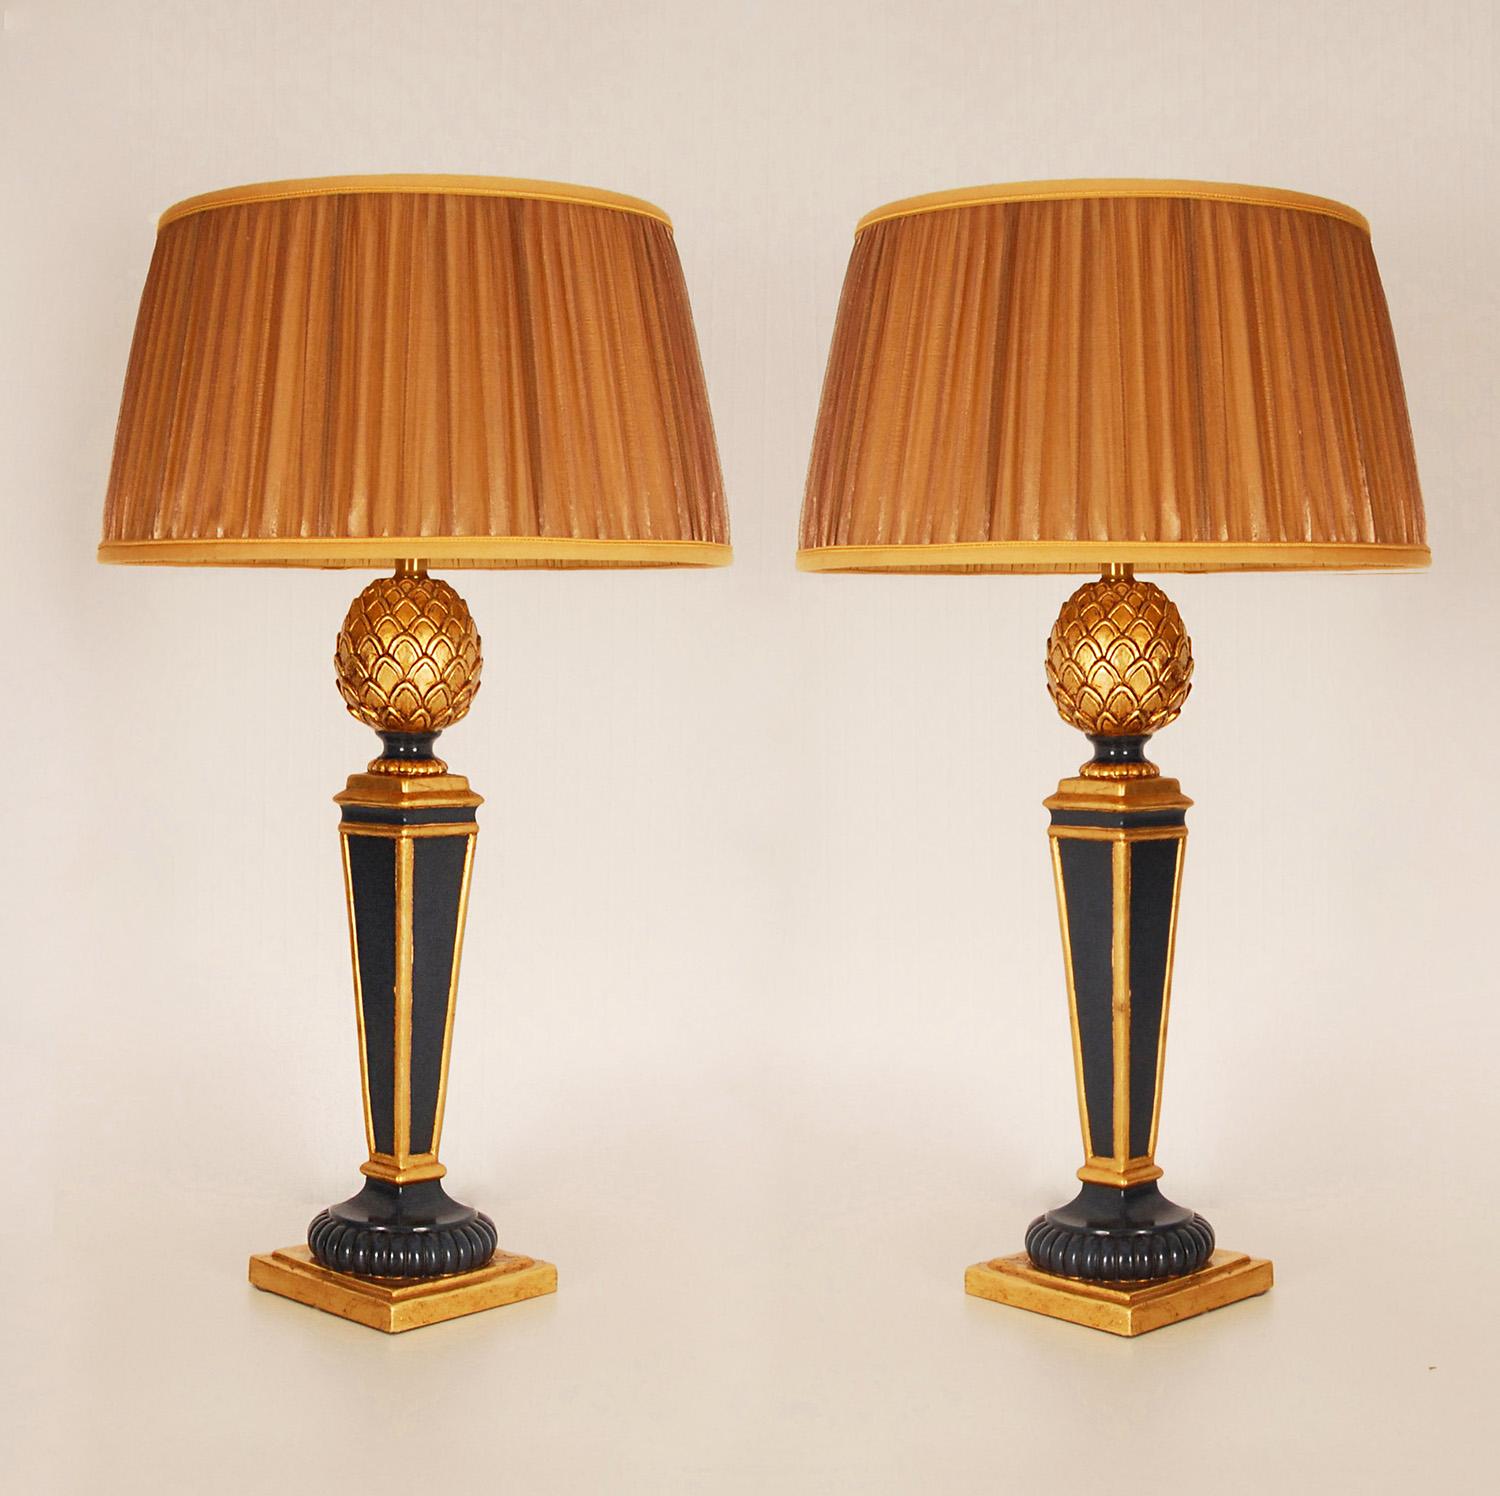 Vintage French High End Lamps Blue Gold Giltwood Pineapple Table Lamps, a Pair For Sale 5